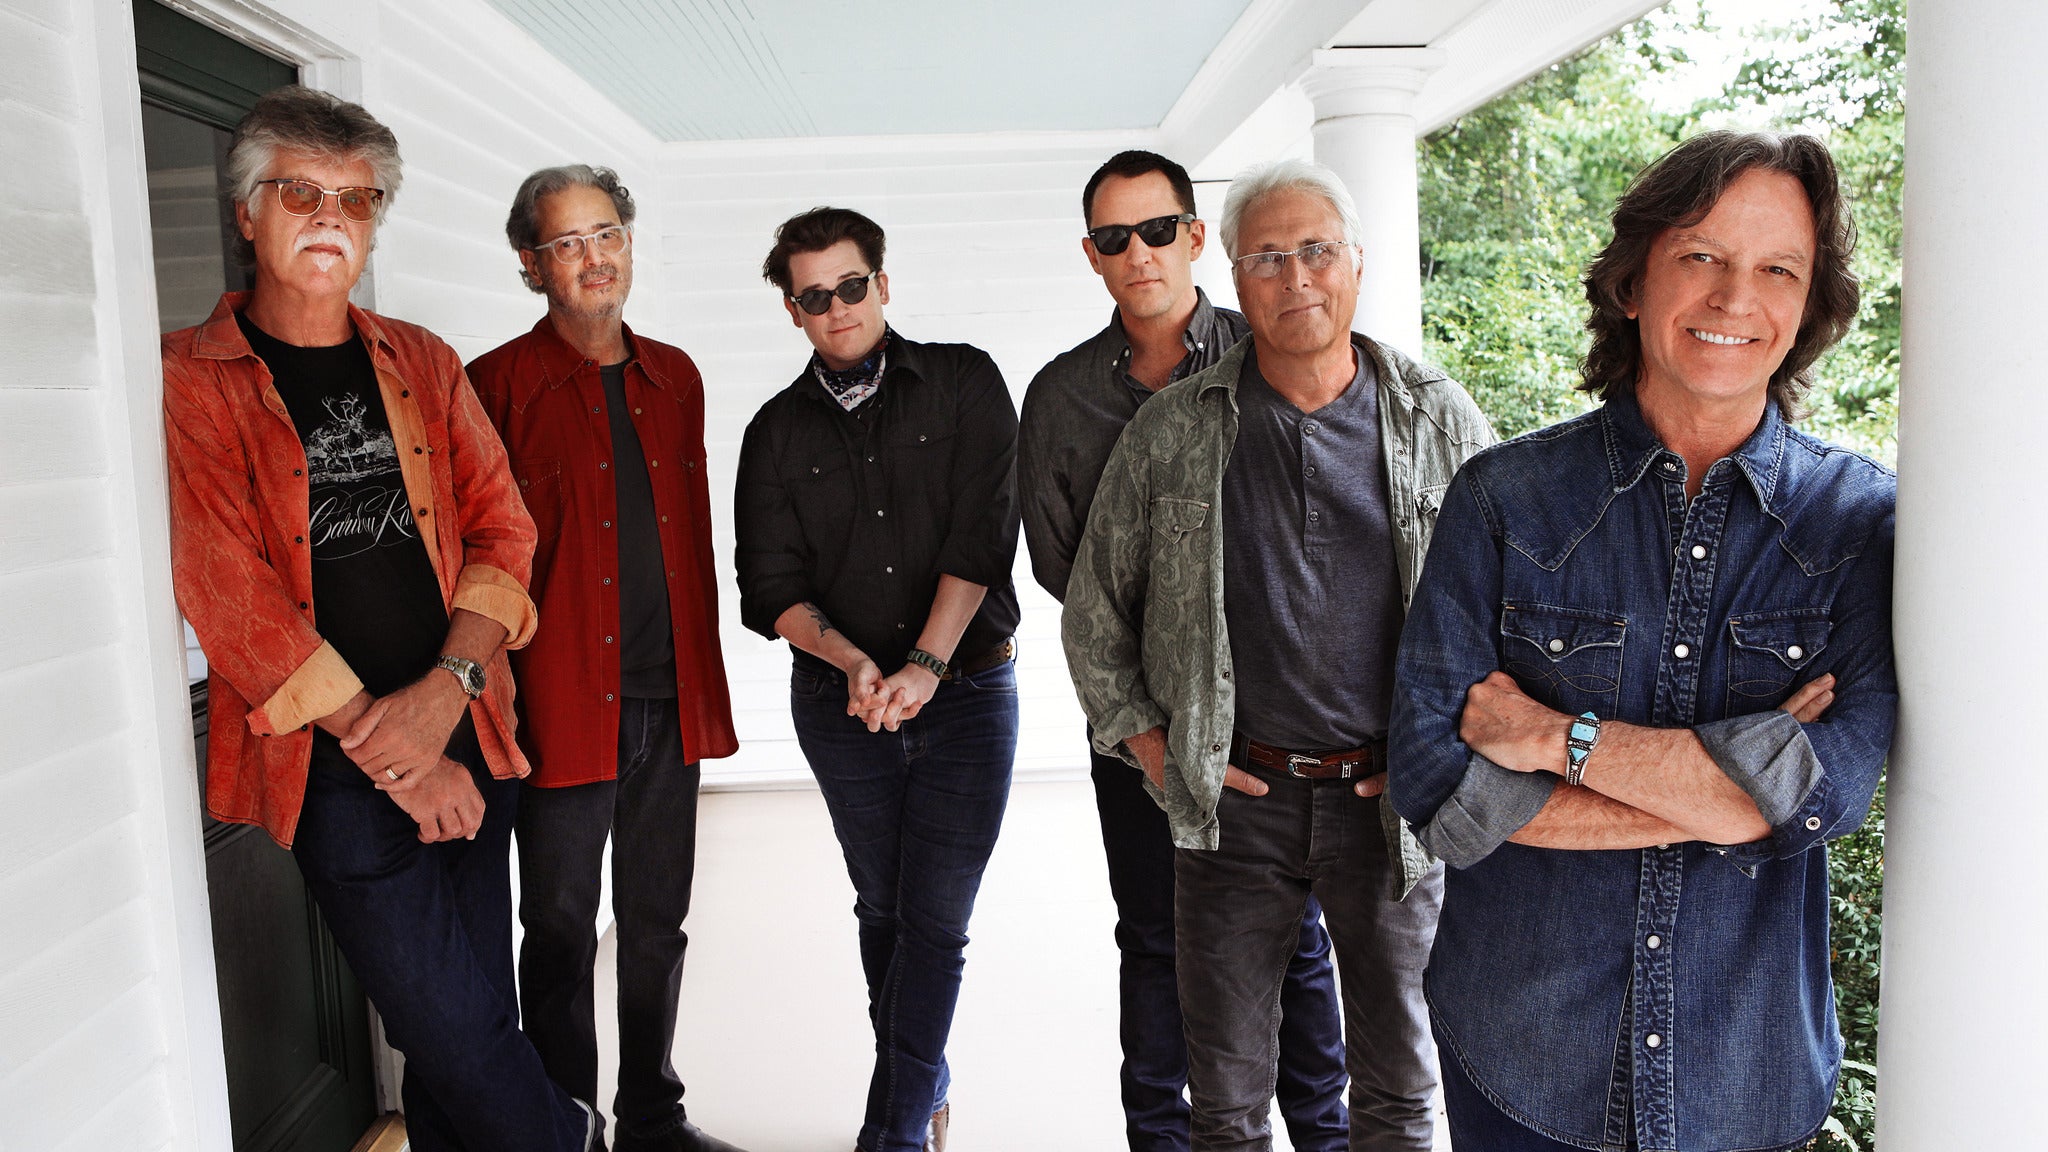 Nitty Gritty Dirt Band in Kansas City promo photo for Official Platinum presale offer code